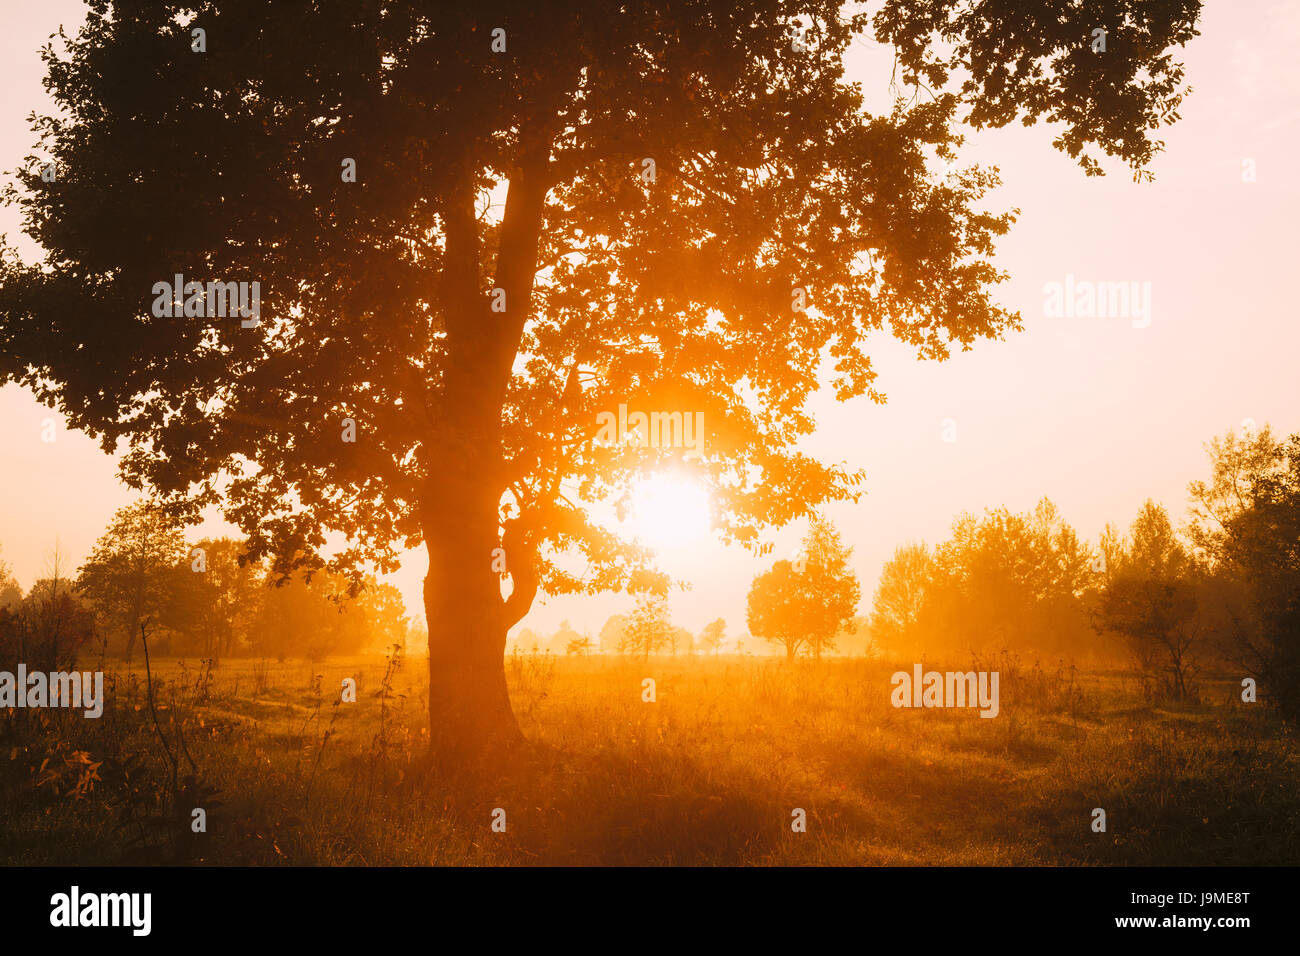 Sunset Or Sunrise In Misty Forest Landscape. Sun Sunshine With Natural Sunlight Through Oak Wood Tree In Morning Forest. Beautiful Scenic View. Autumn Stock Photo